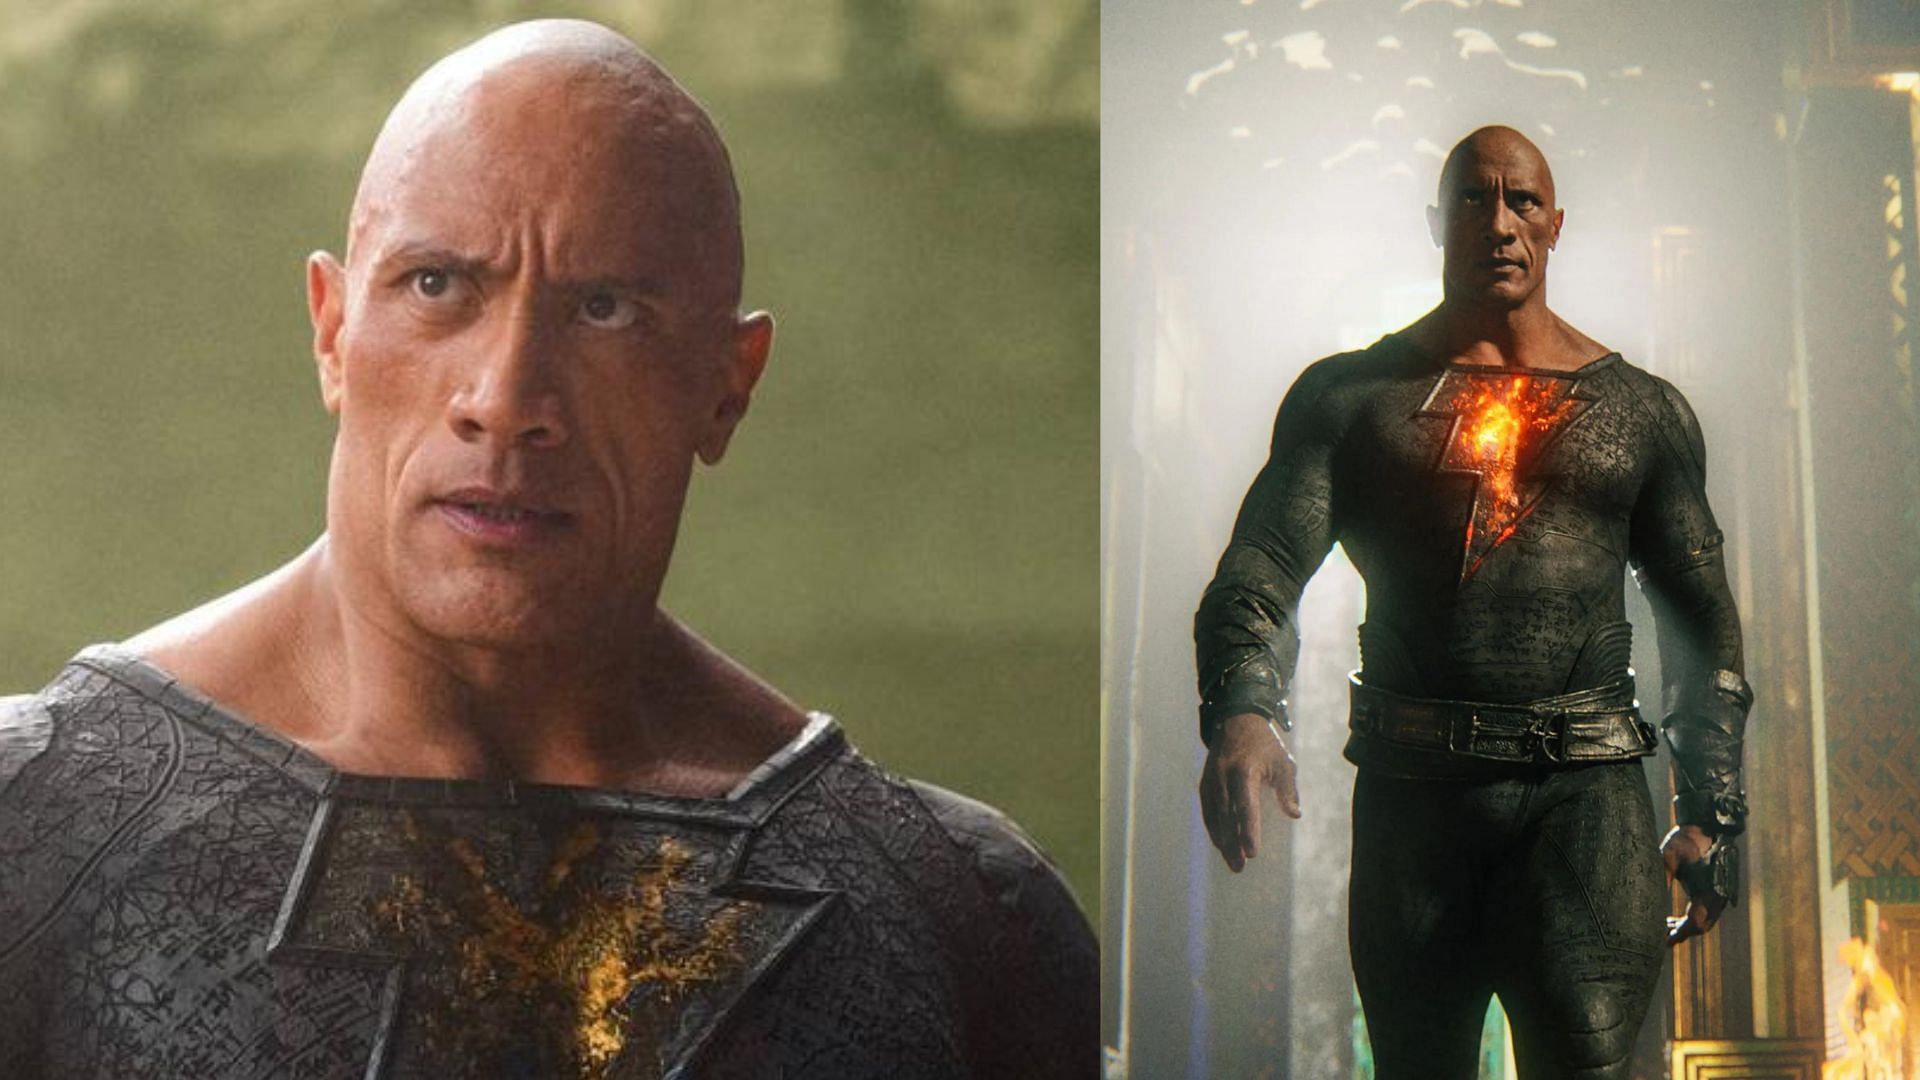 Hollywood actor and WWE personality Dwayne Johnson as Black Adam